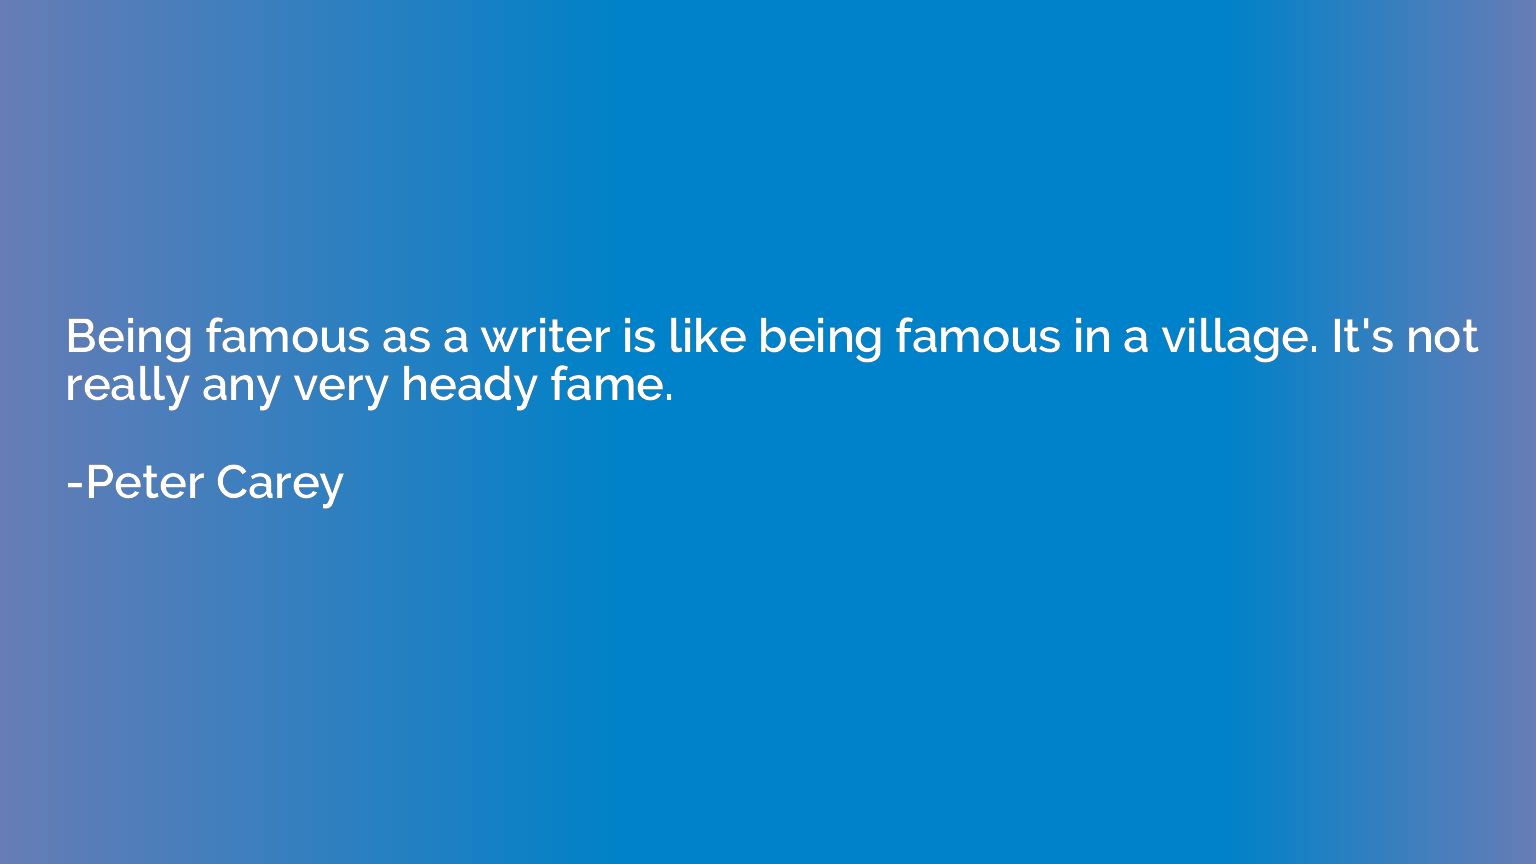 Being famous as a writer is like being famous in a village. 